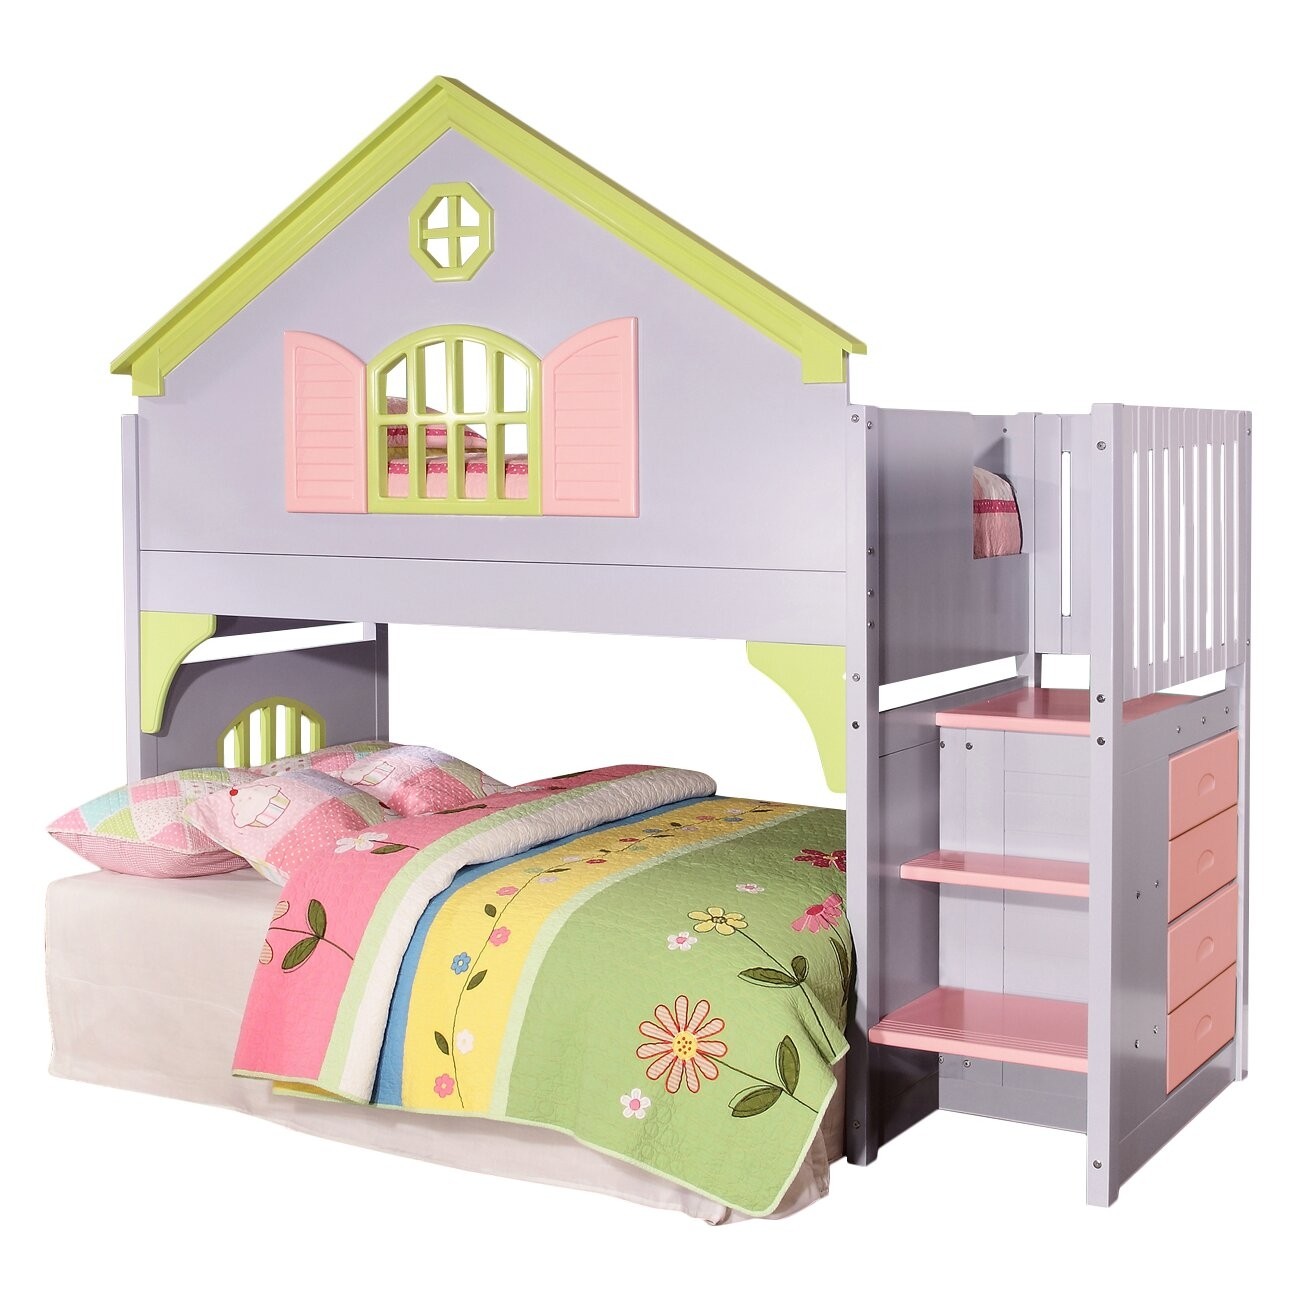 Donco kids donco kids doll house twin loft bed reviews